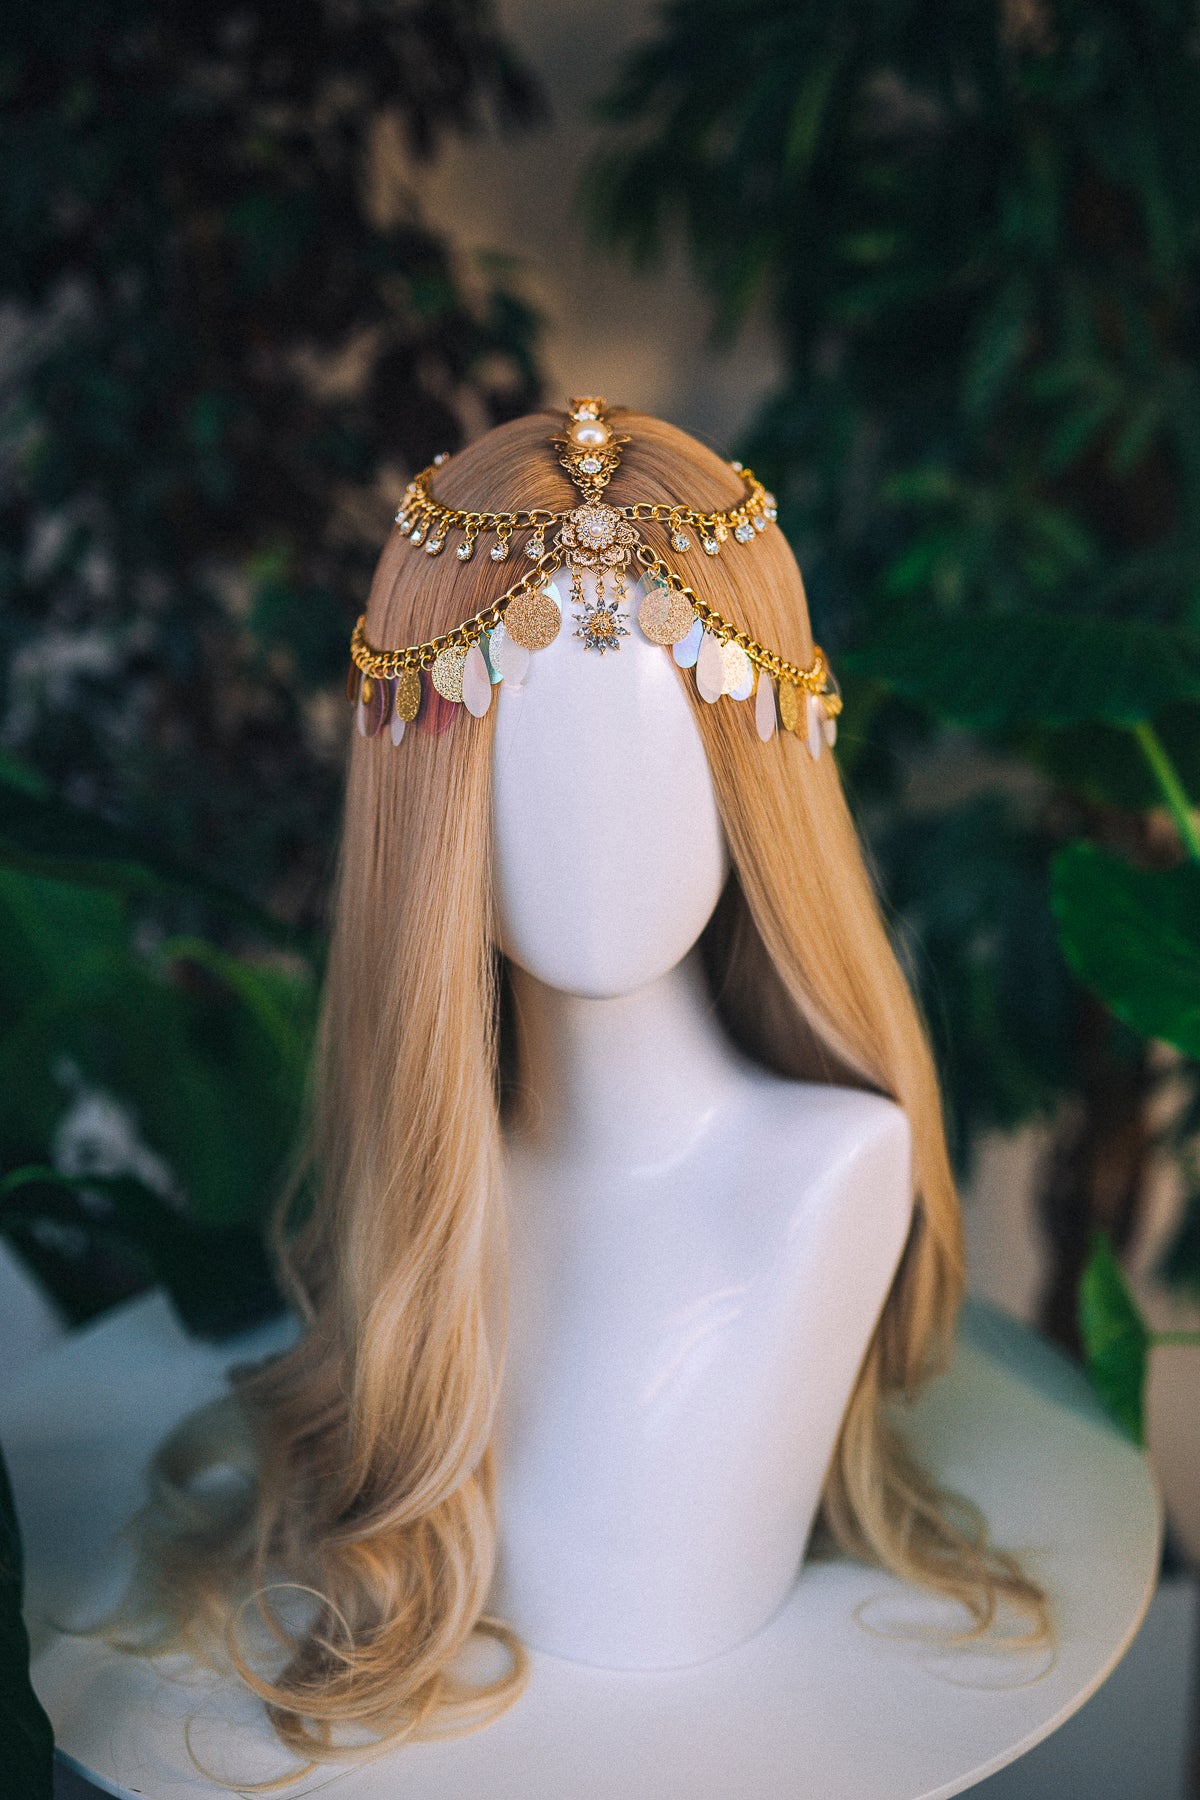 Load image into Gallery viewer, Festival Sequin Headband Chain Headpiece Party Crown
